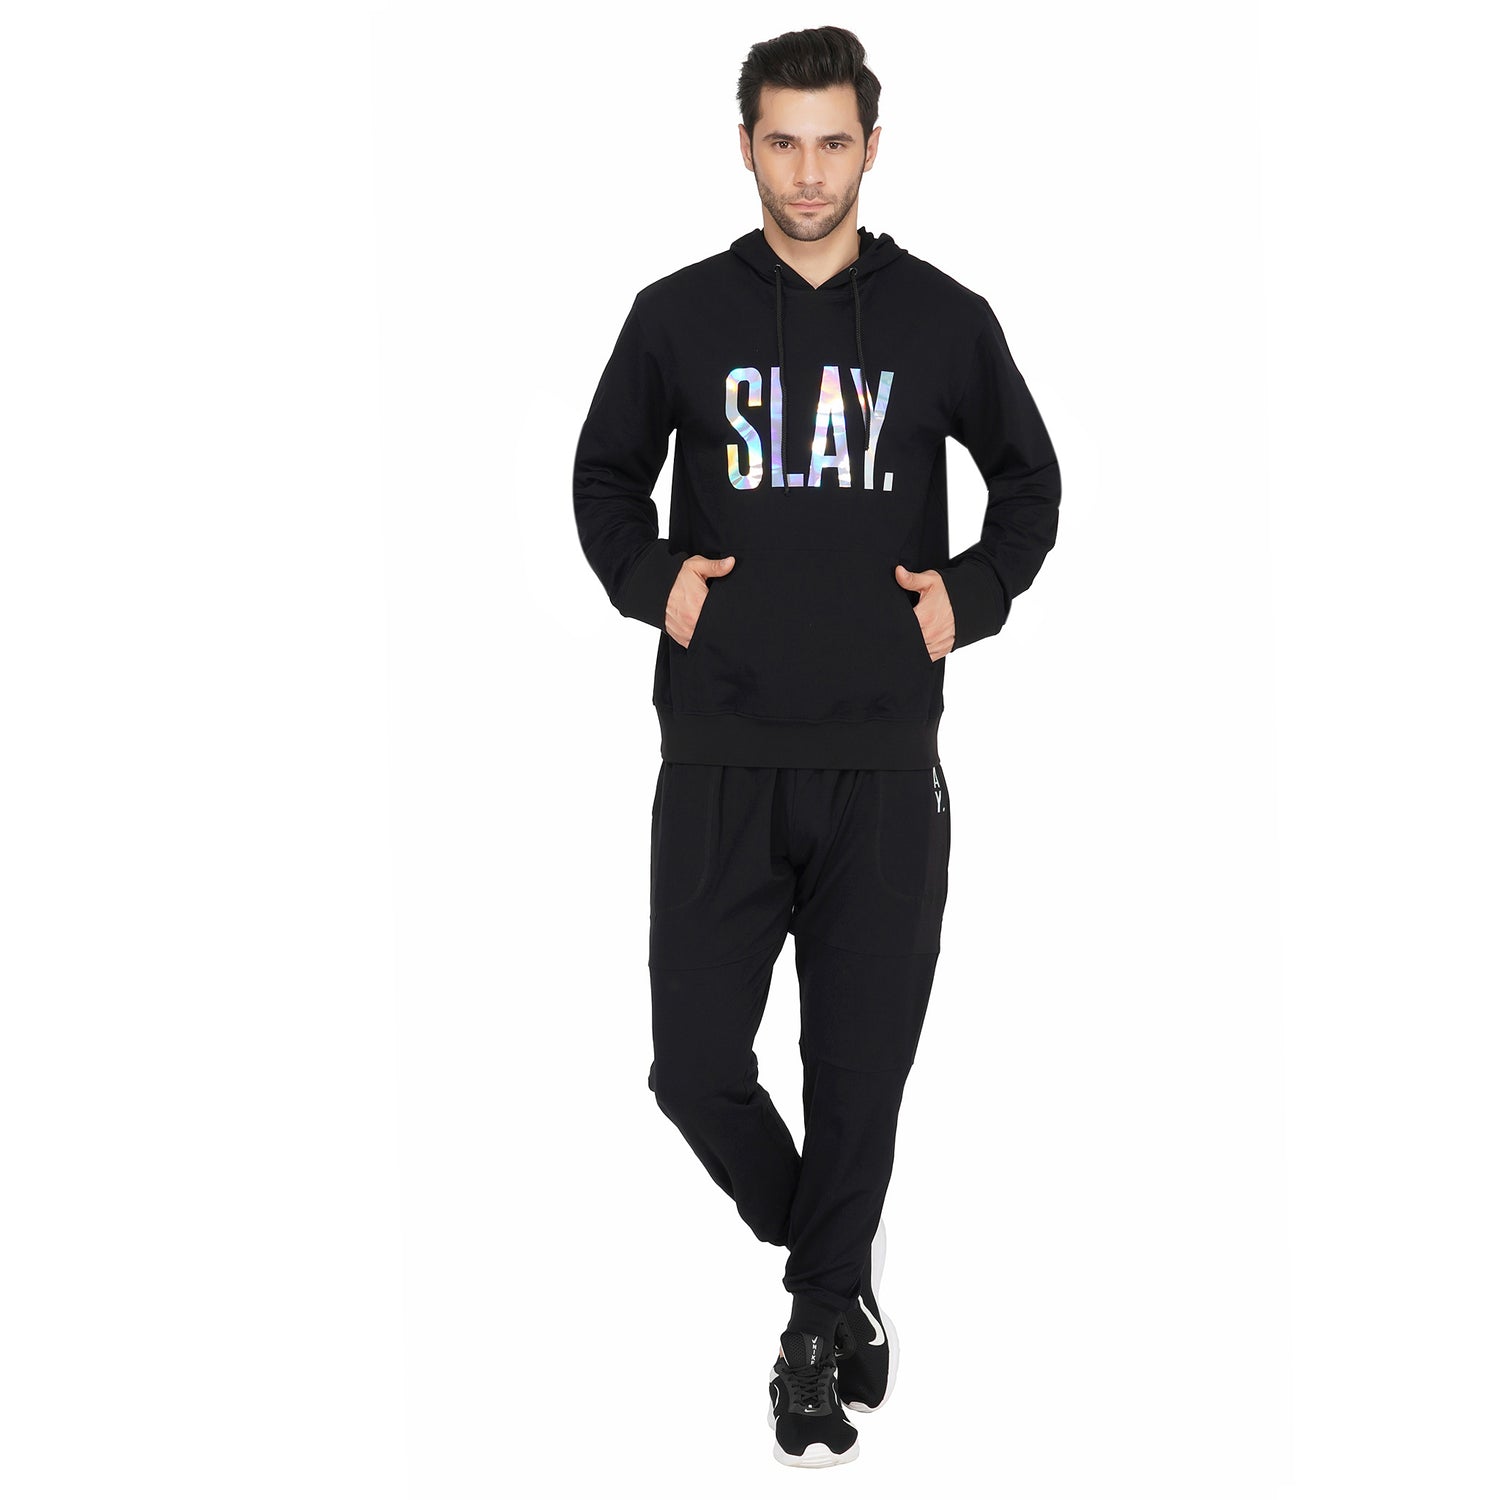 SLAY. Classic Men's Limited Edition Holographic  Reflective Print Black Printed Tracksuit-clothing-to-slay.myshopify.com-Tracksuit